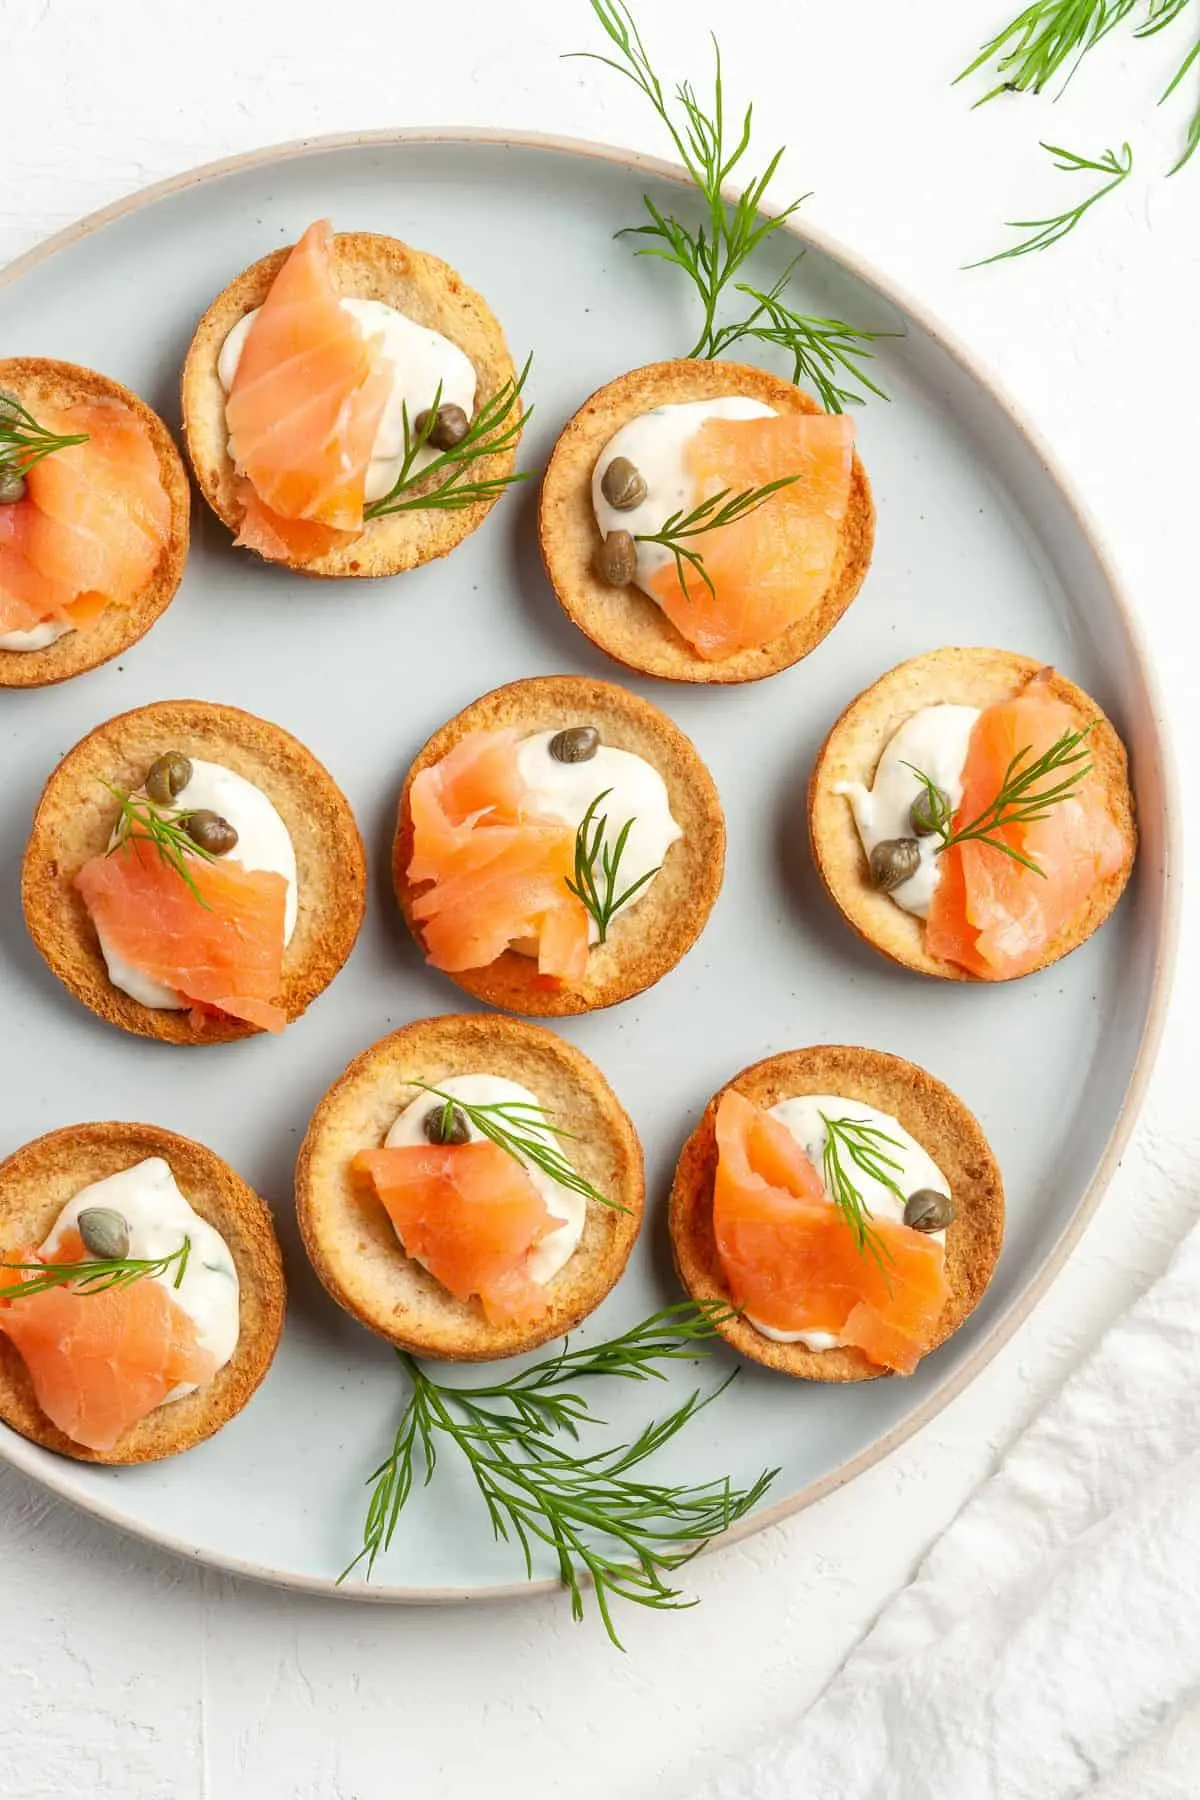 smoked salmon accompaniments suited - What is the accompaniment of smoked salmon